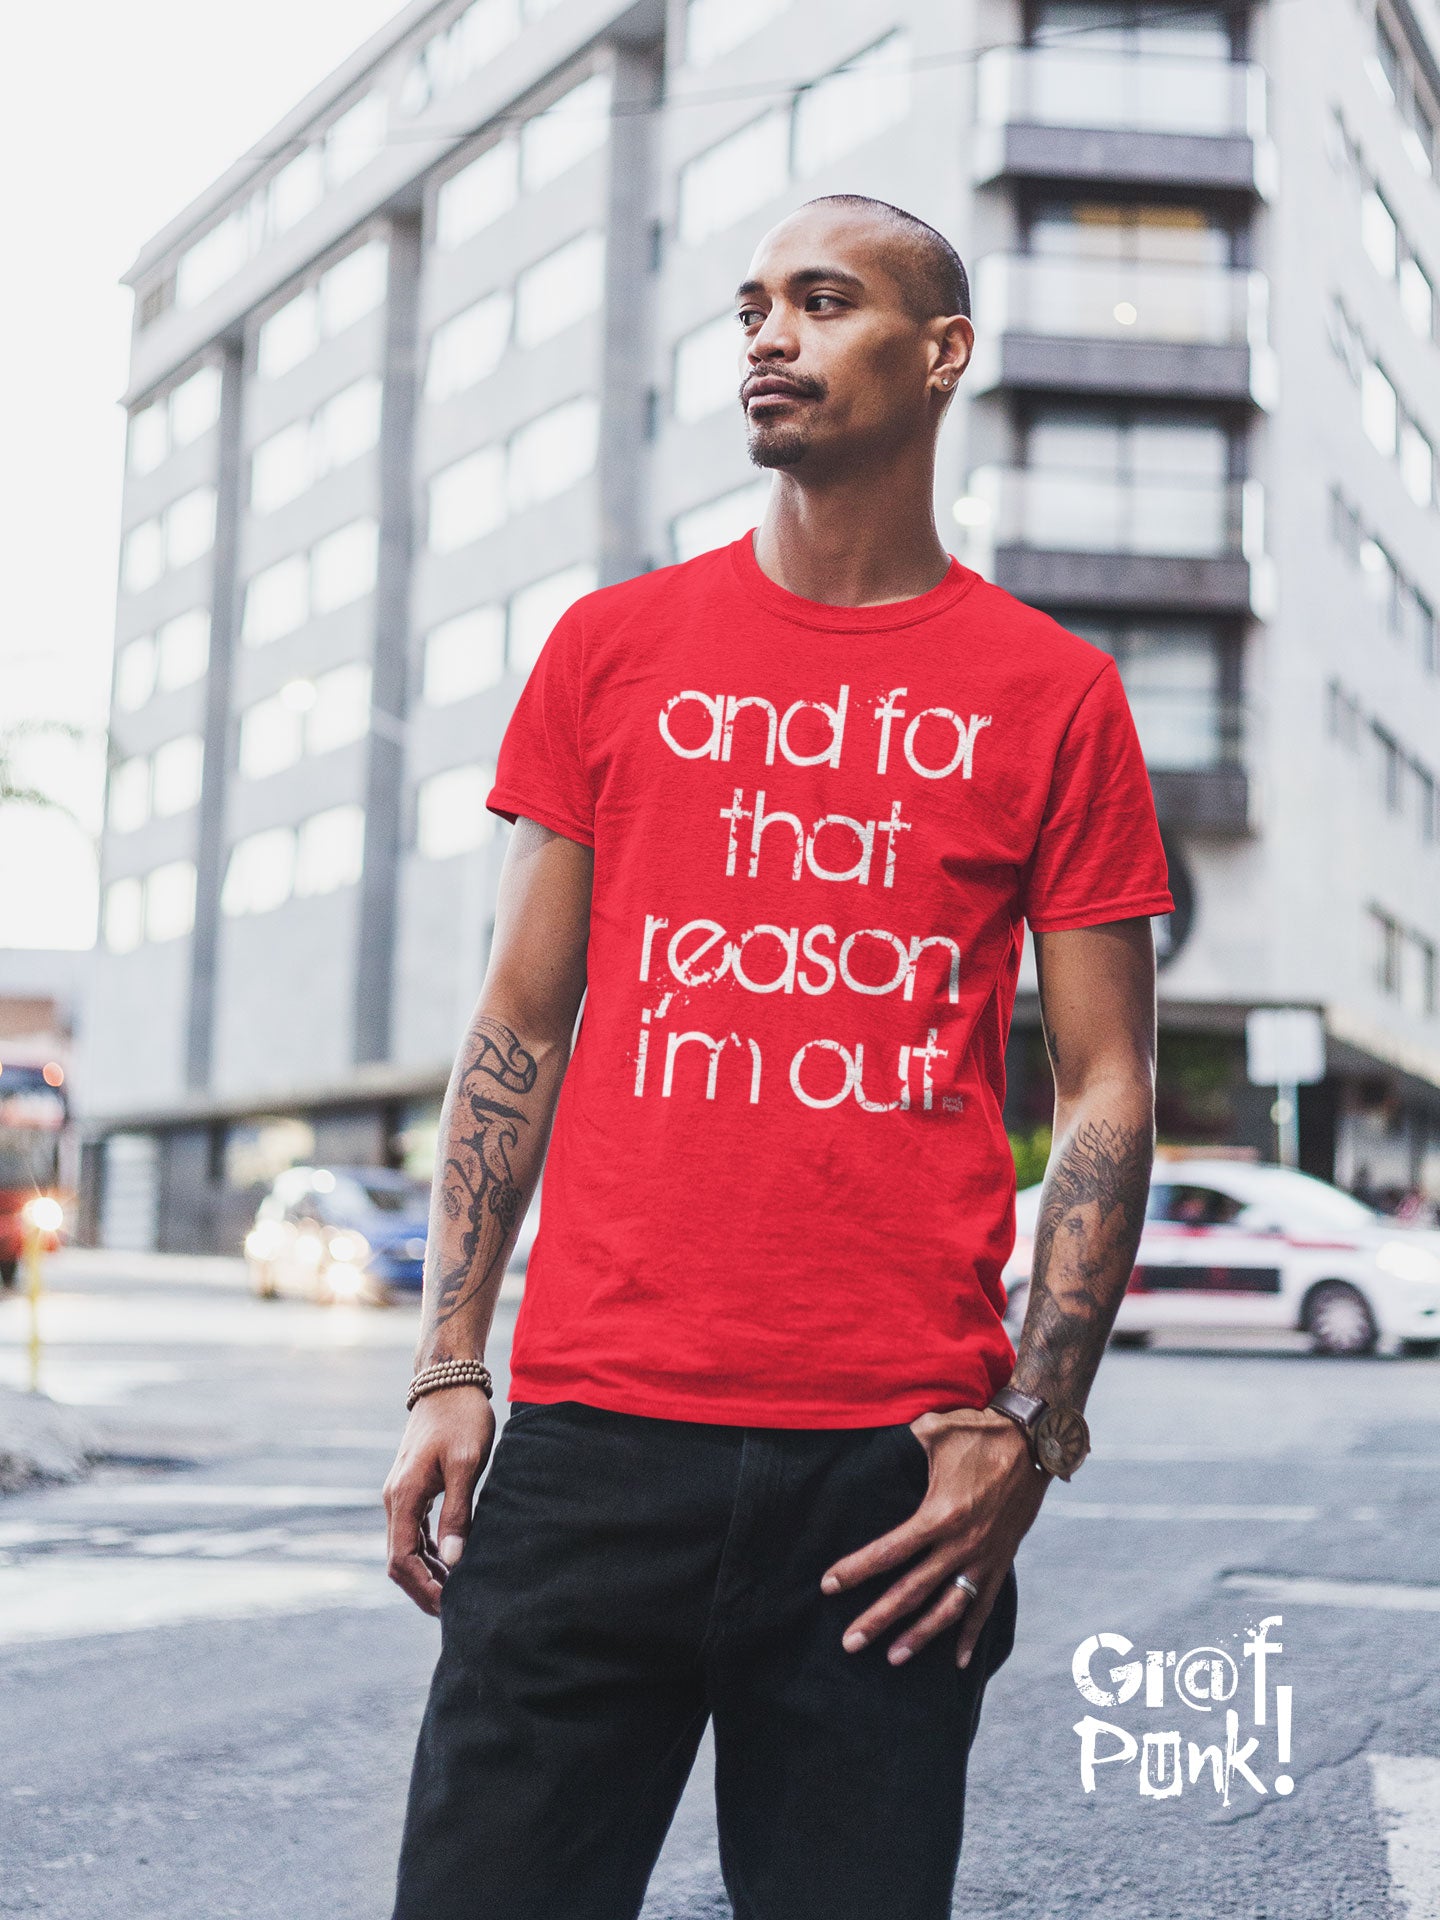 And For That Reason I'm Out T Shirt by GrafPunk